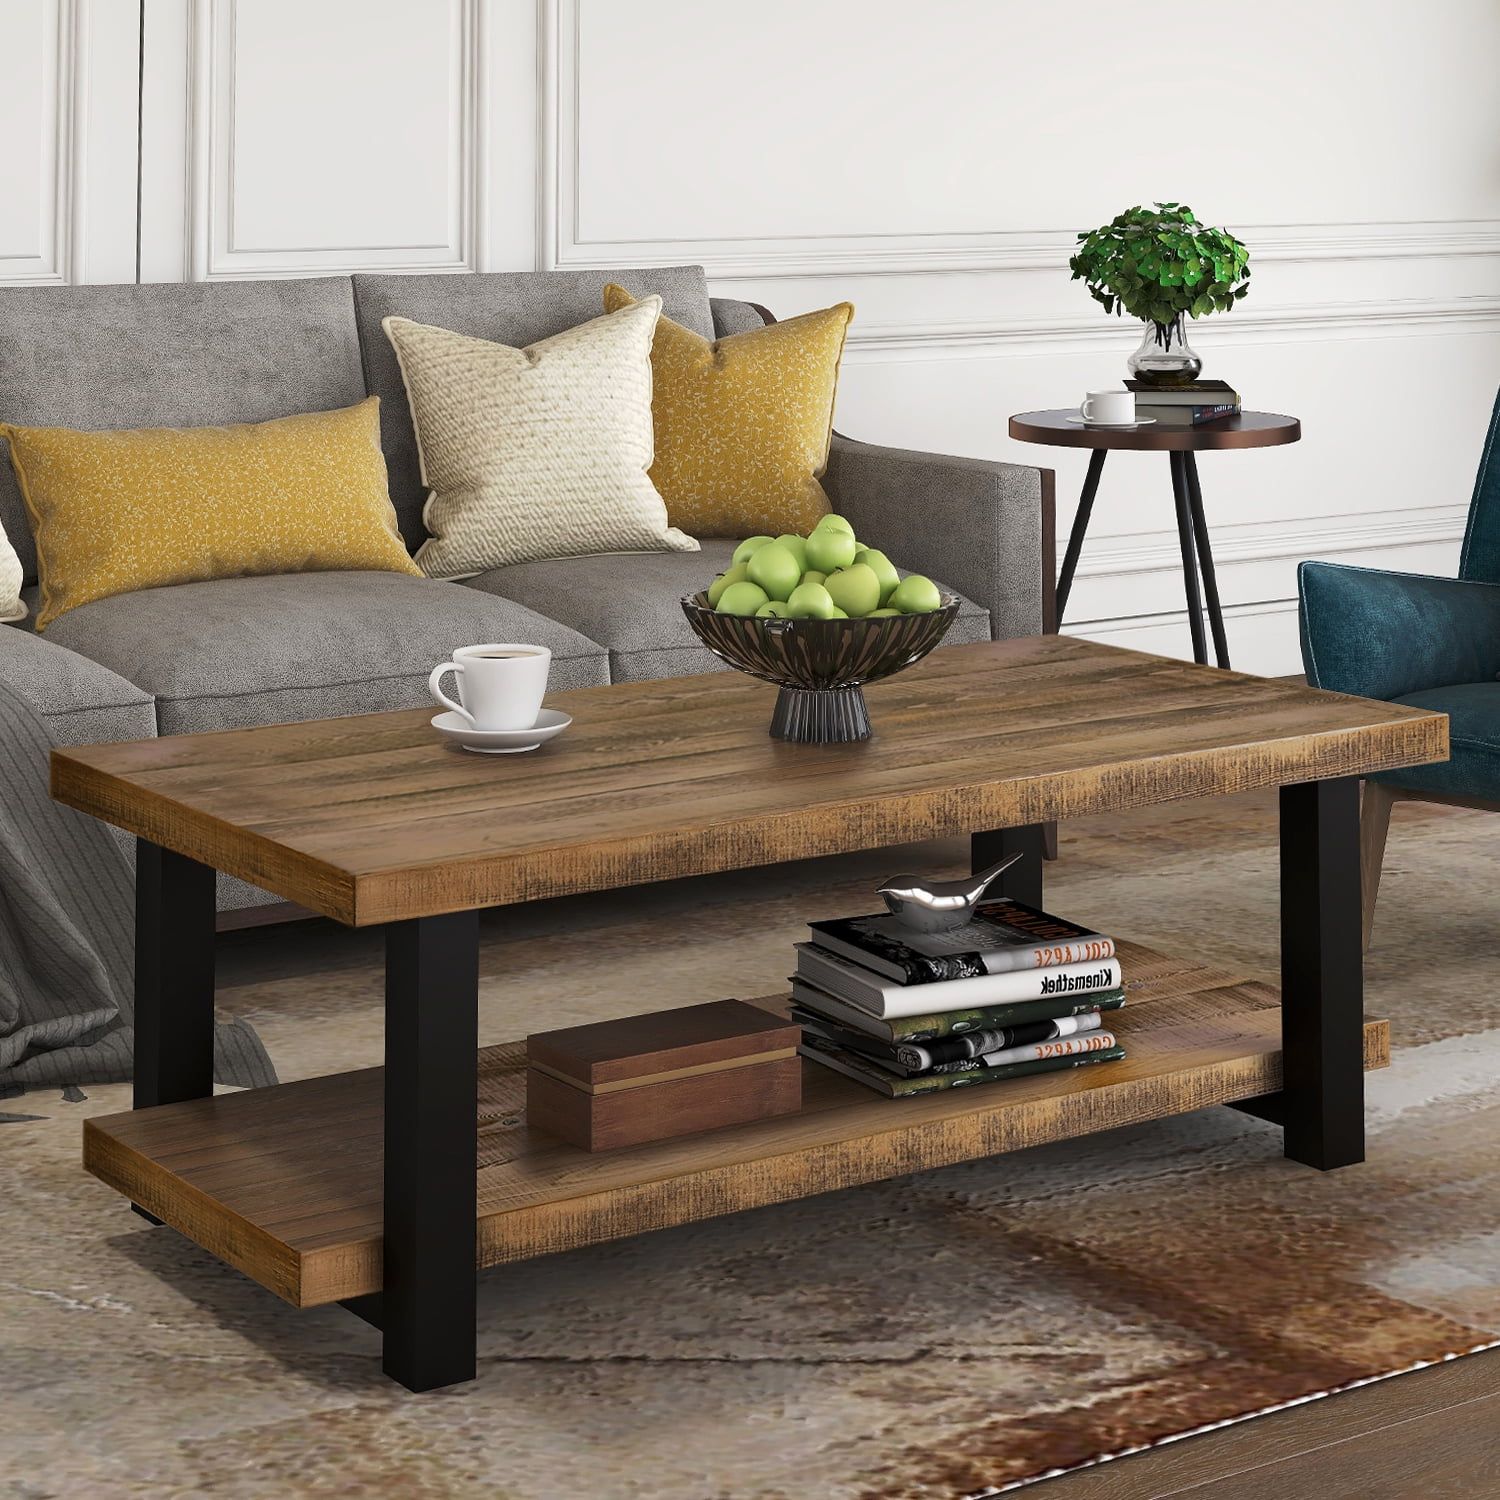 Topcobe Rustic Natural Coffee Table With Storage Shelf, Side End Table With Regard To Rectangular Coffee Tables With Pedestal Bases (View 2 of 15)